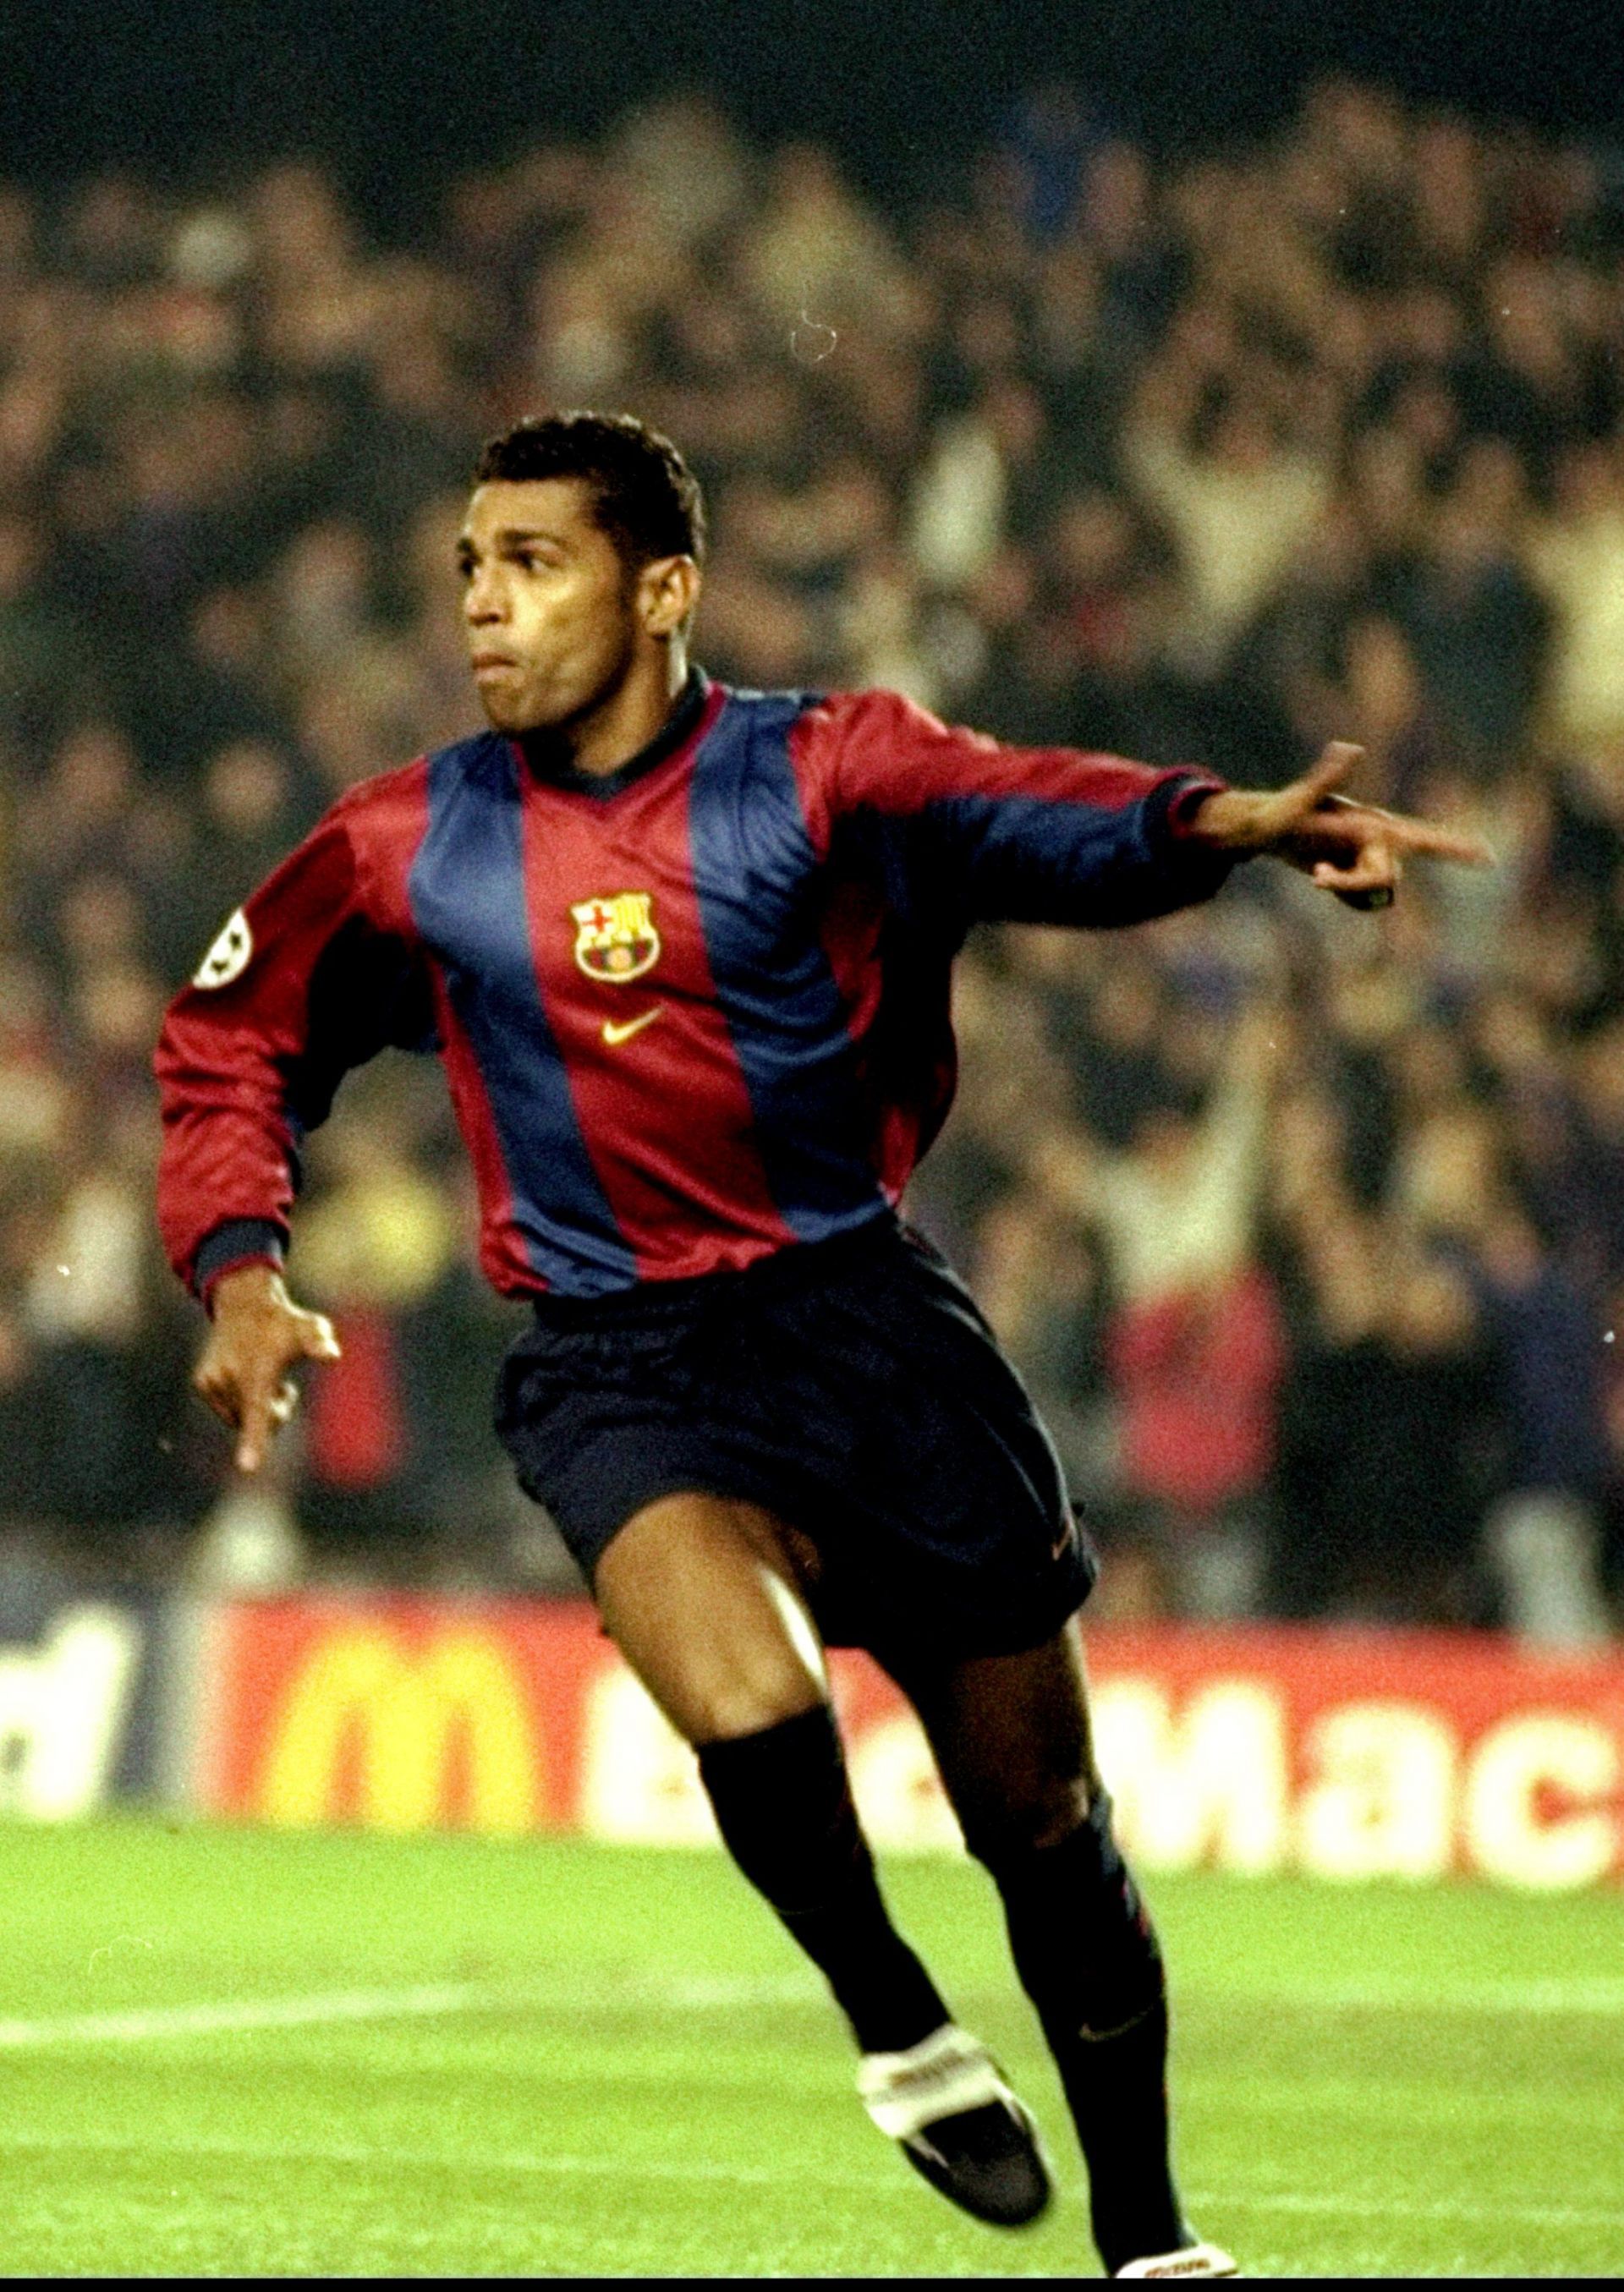 Sonny Anderson scores a goal against Manchester United in UEFA Champions Legaue